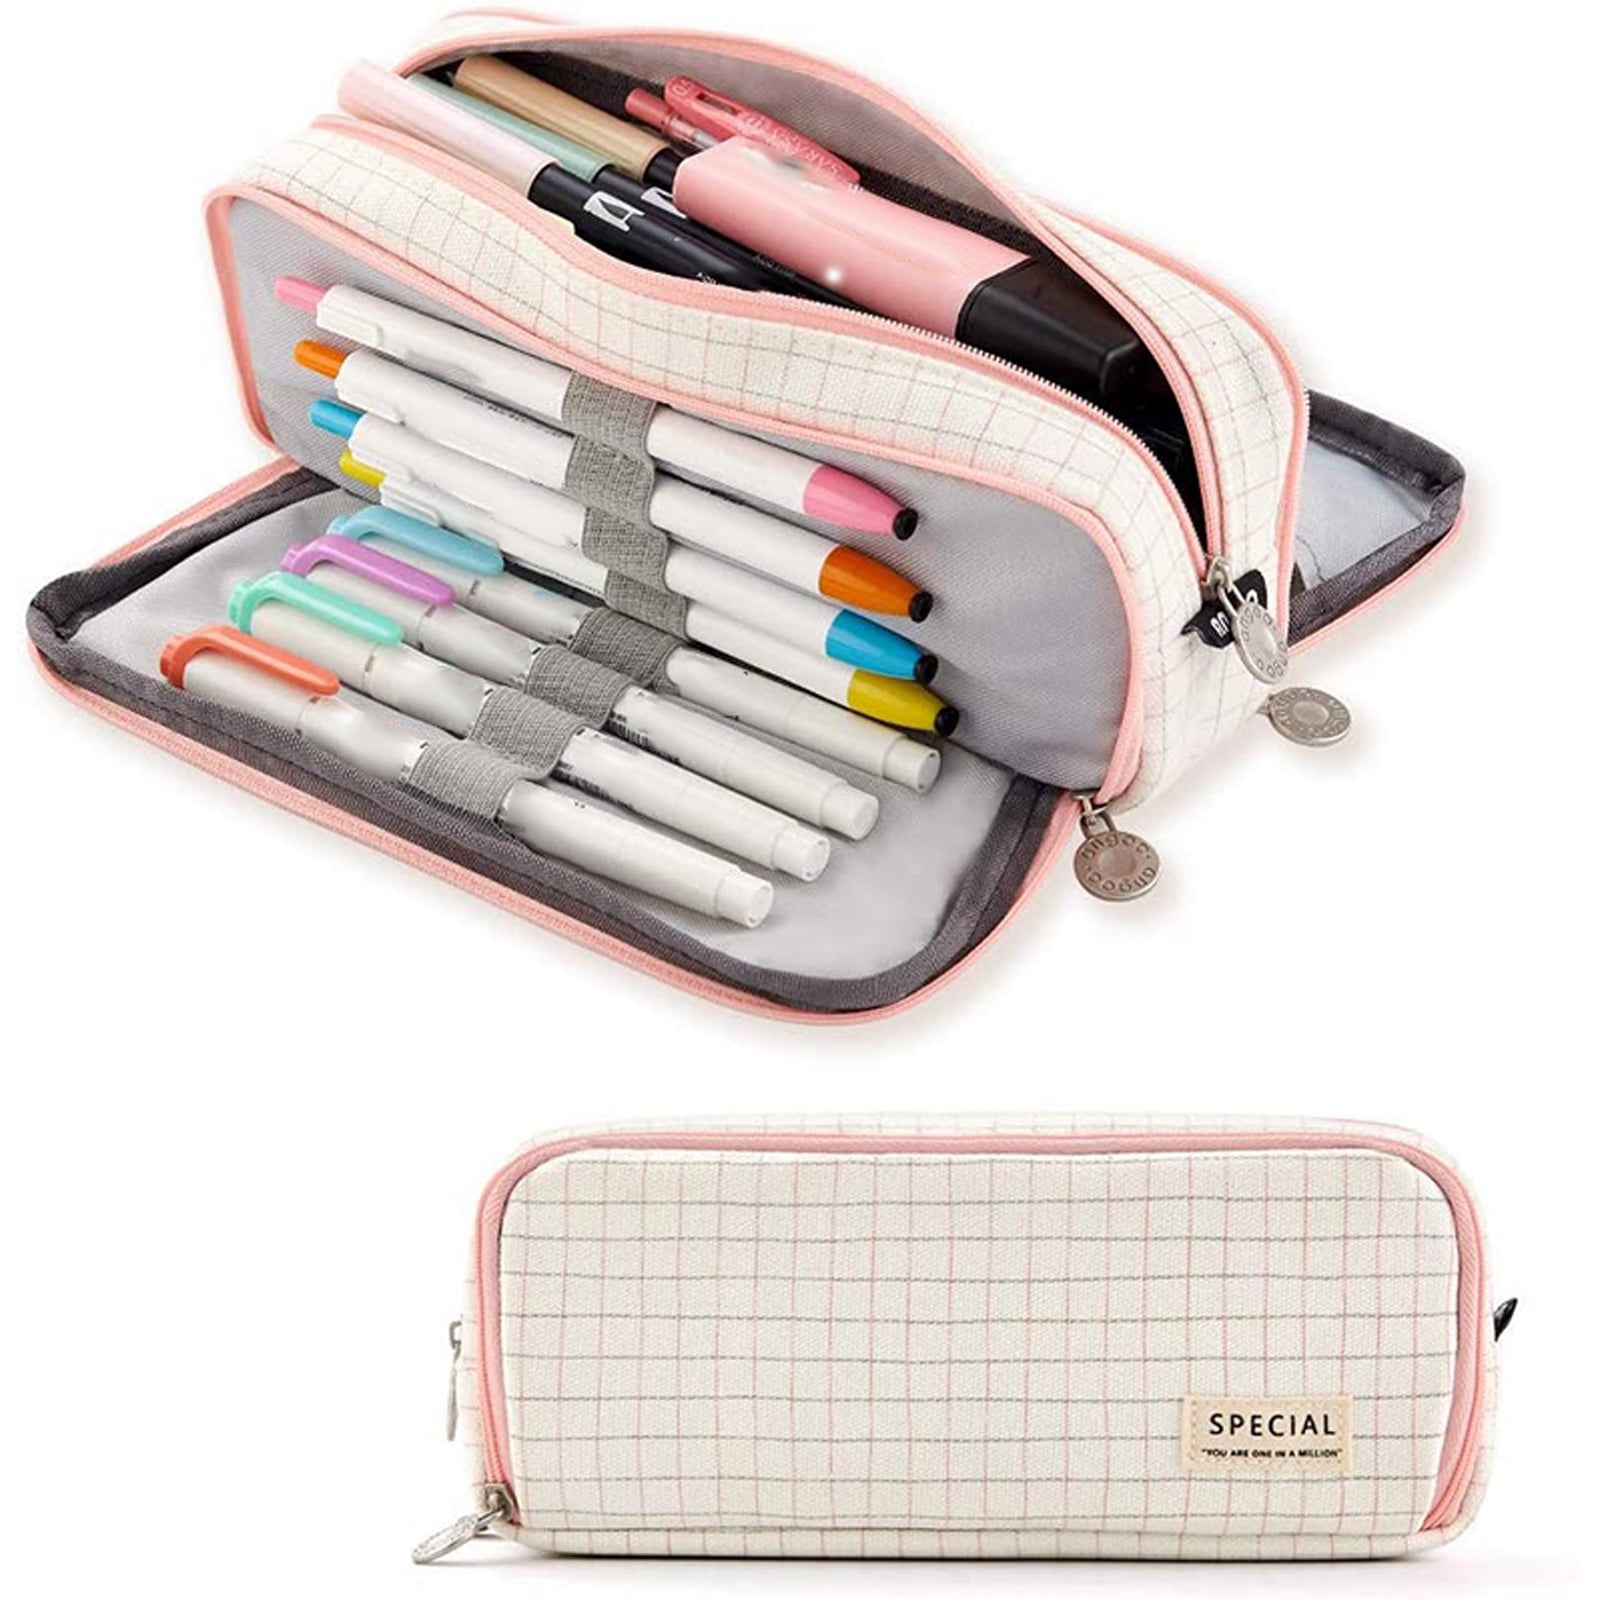 Pencil Case Large Pencil Cases for Girls Boys Big India